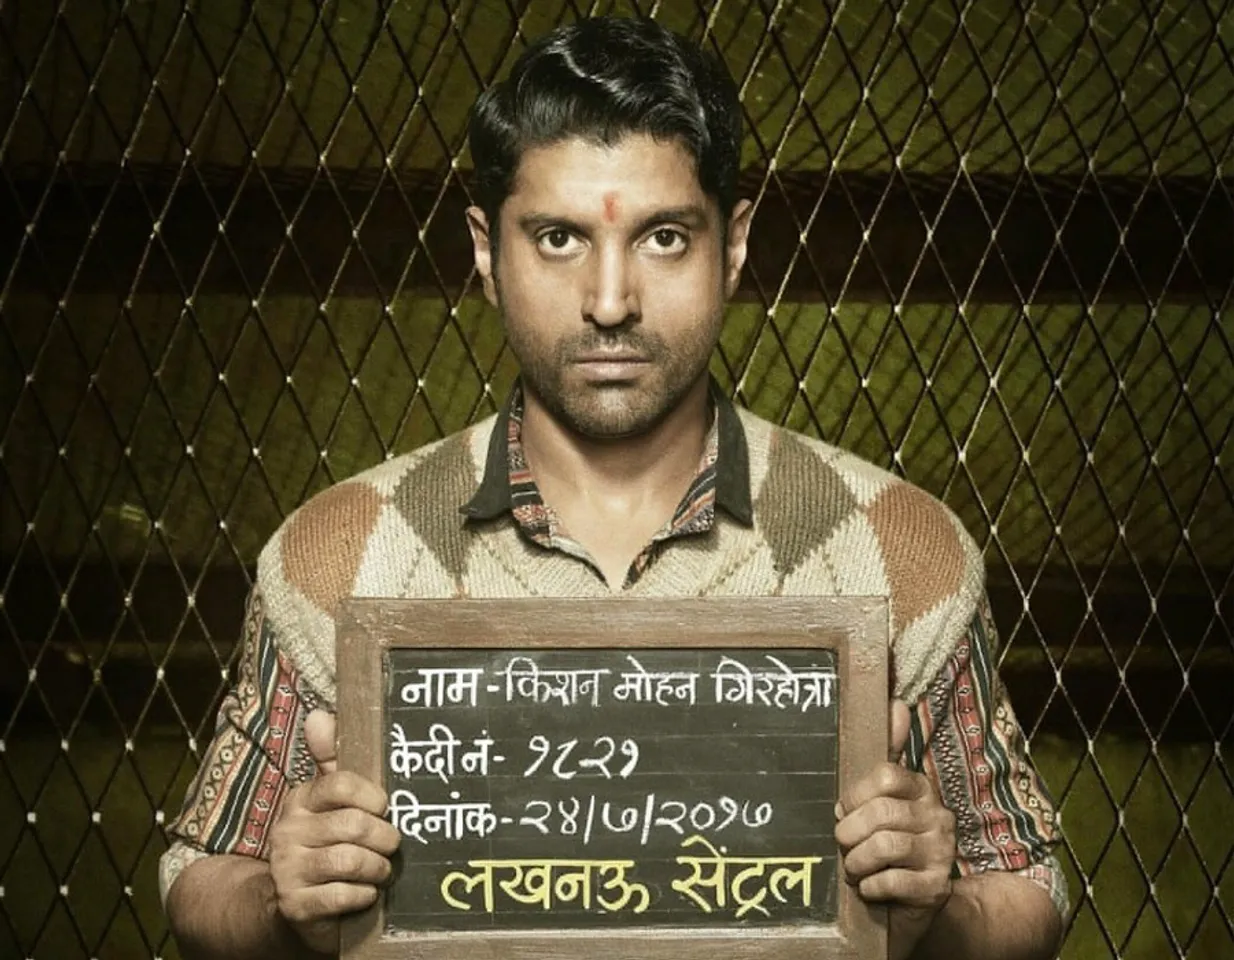 LUCKNOW CENTRAL—THERE'S NO ESCAPING THIS ONE!